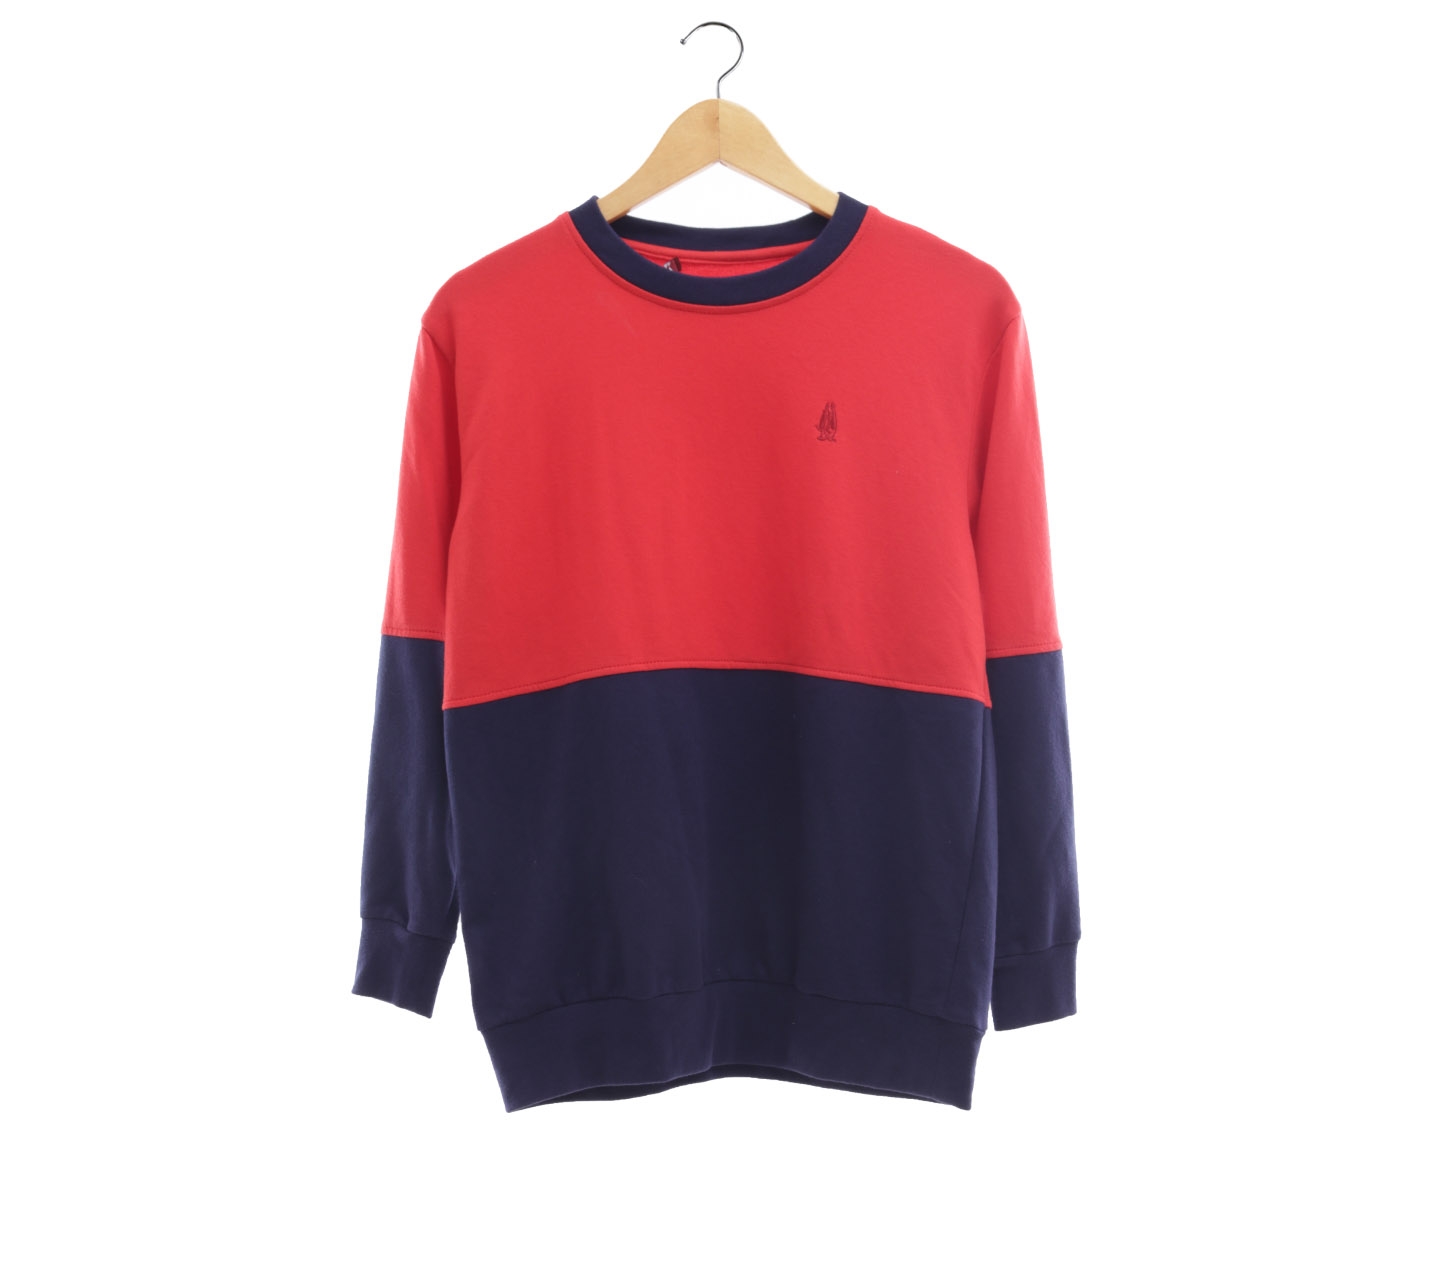 Hush Puppies Red & Navy Blouse